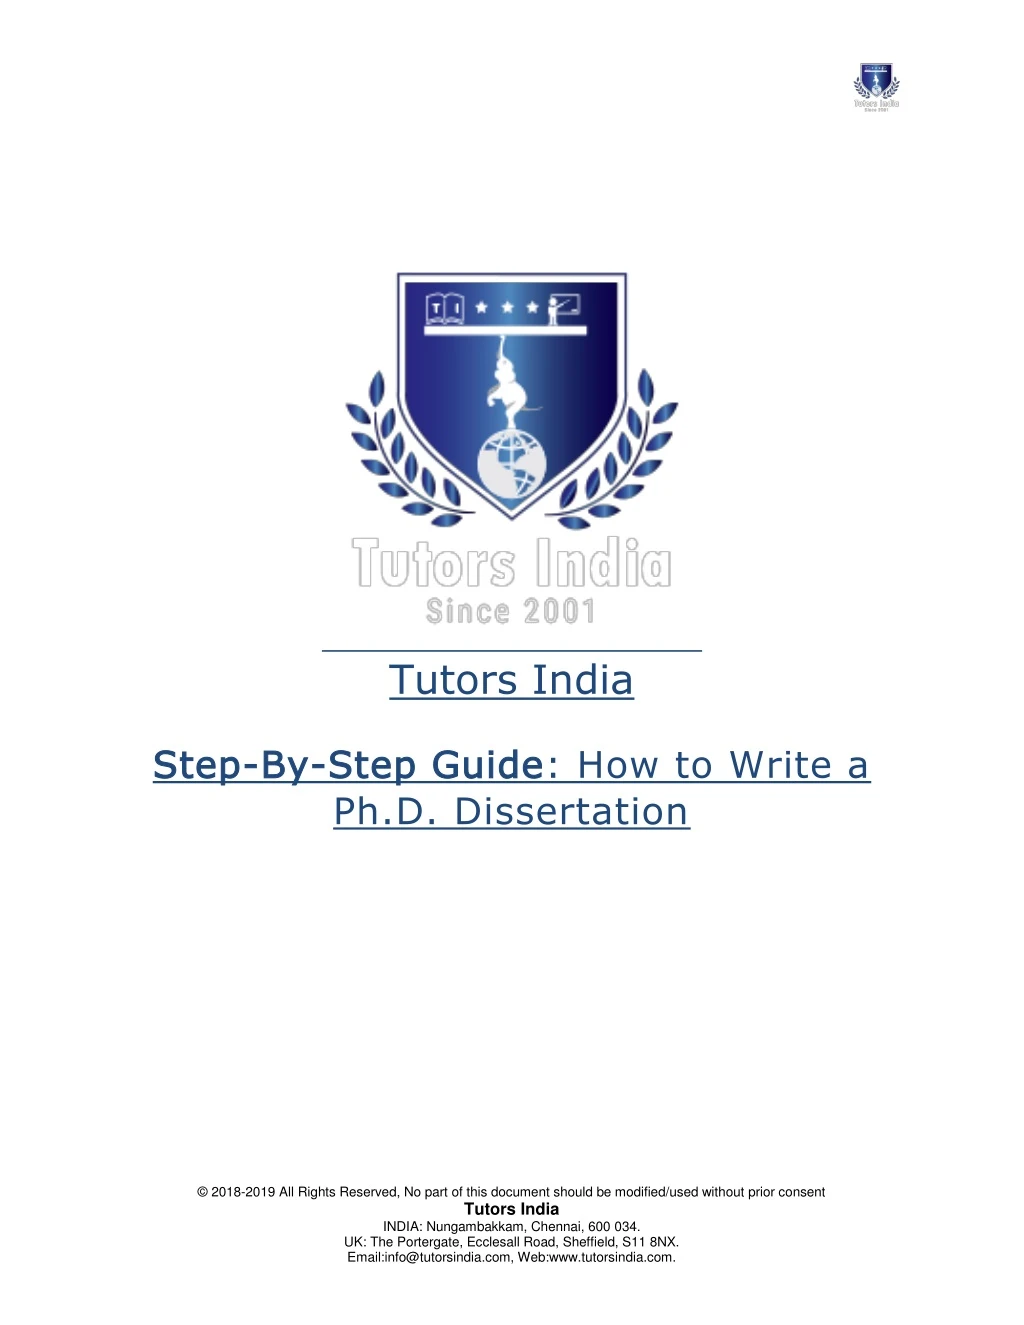 tutors india by step guide step guide